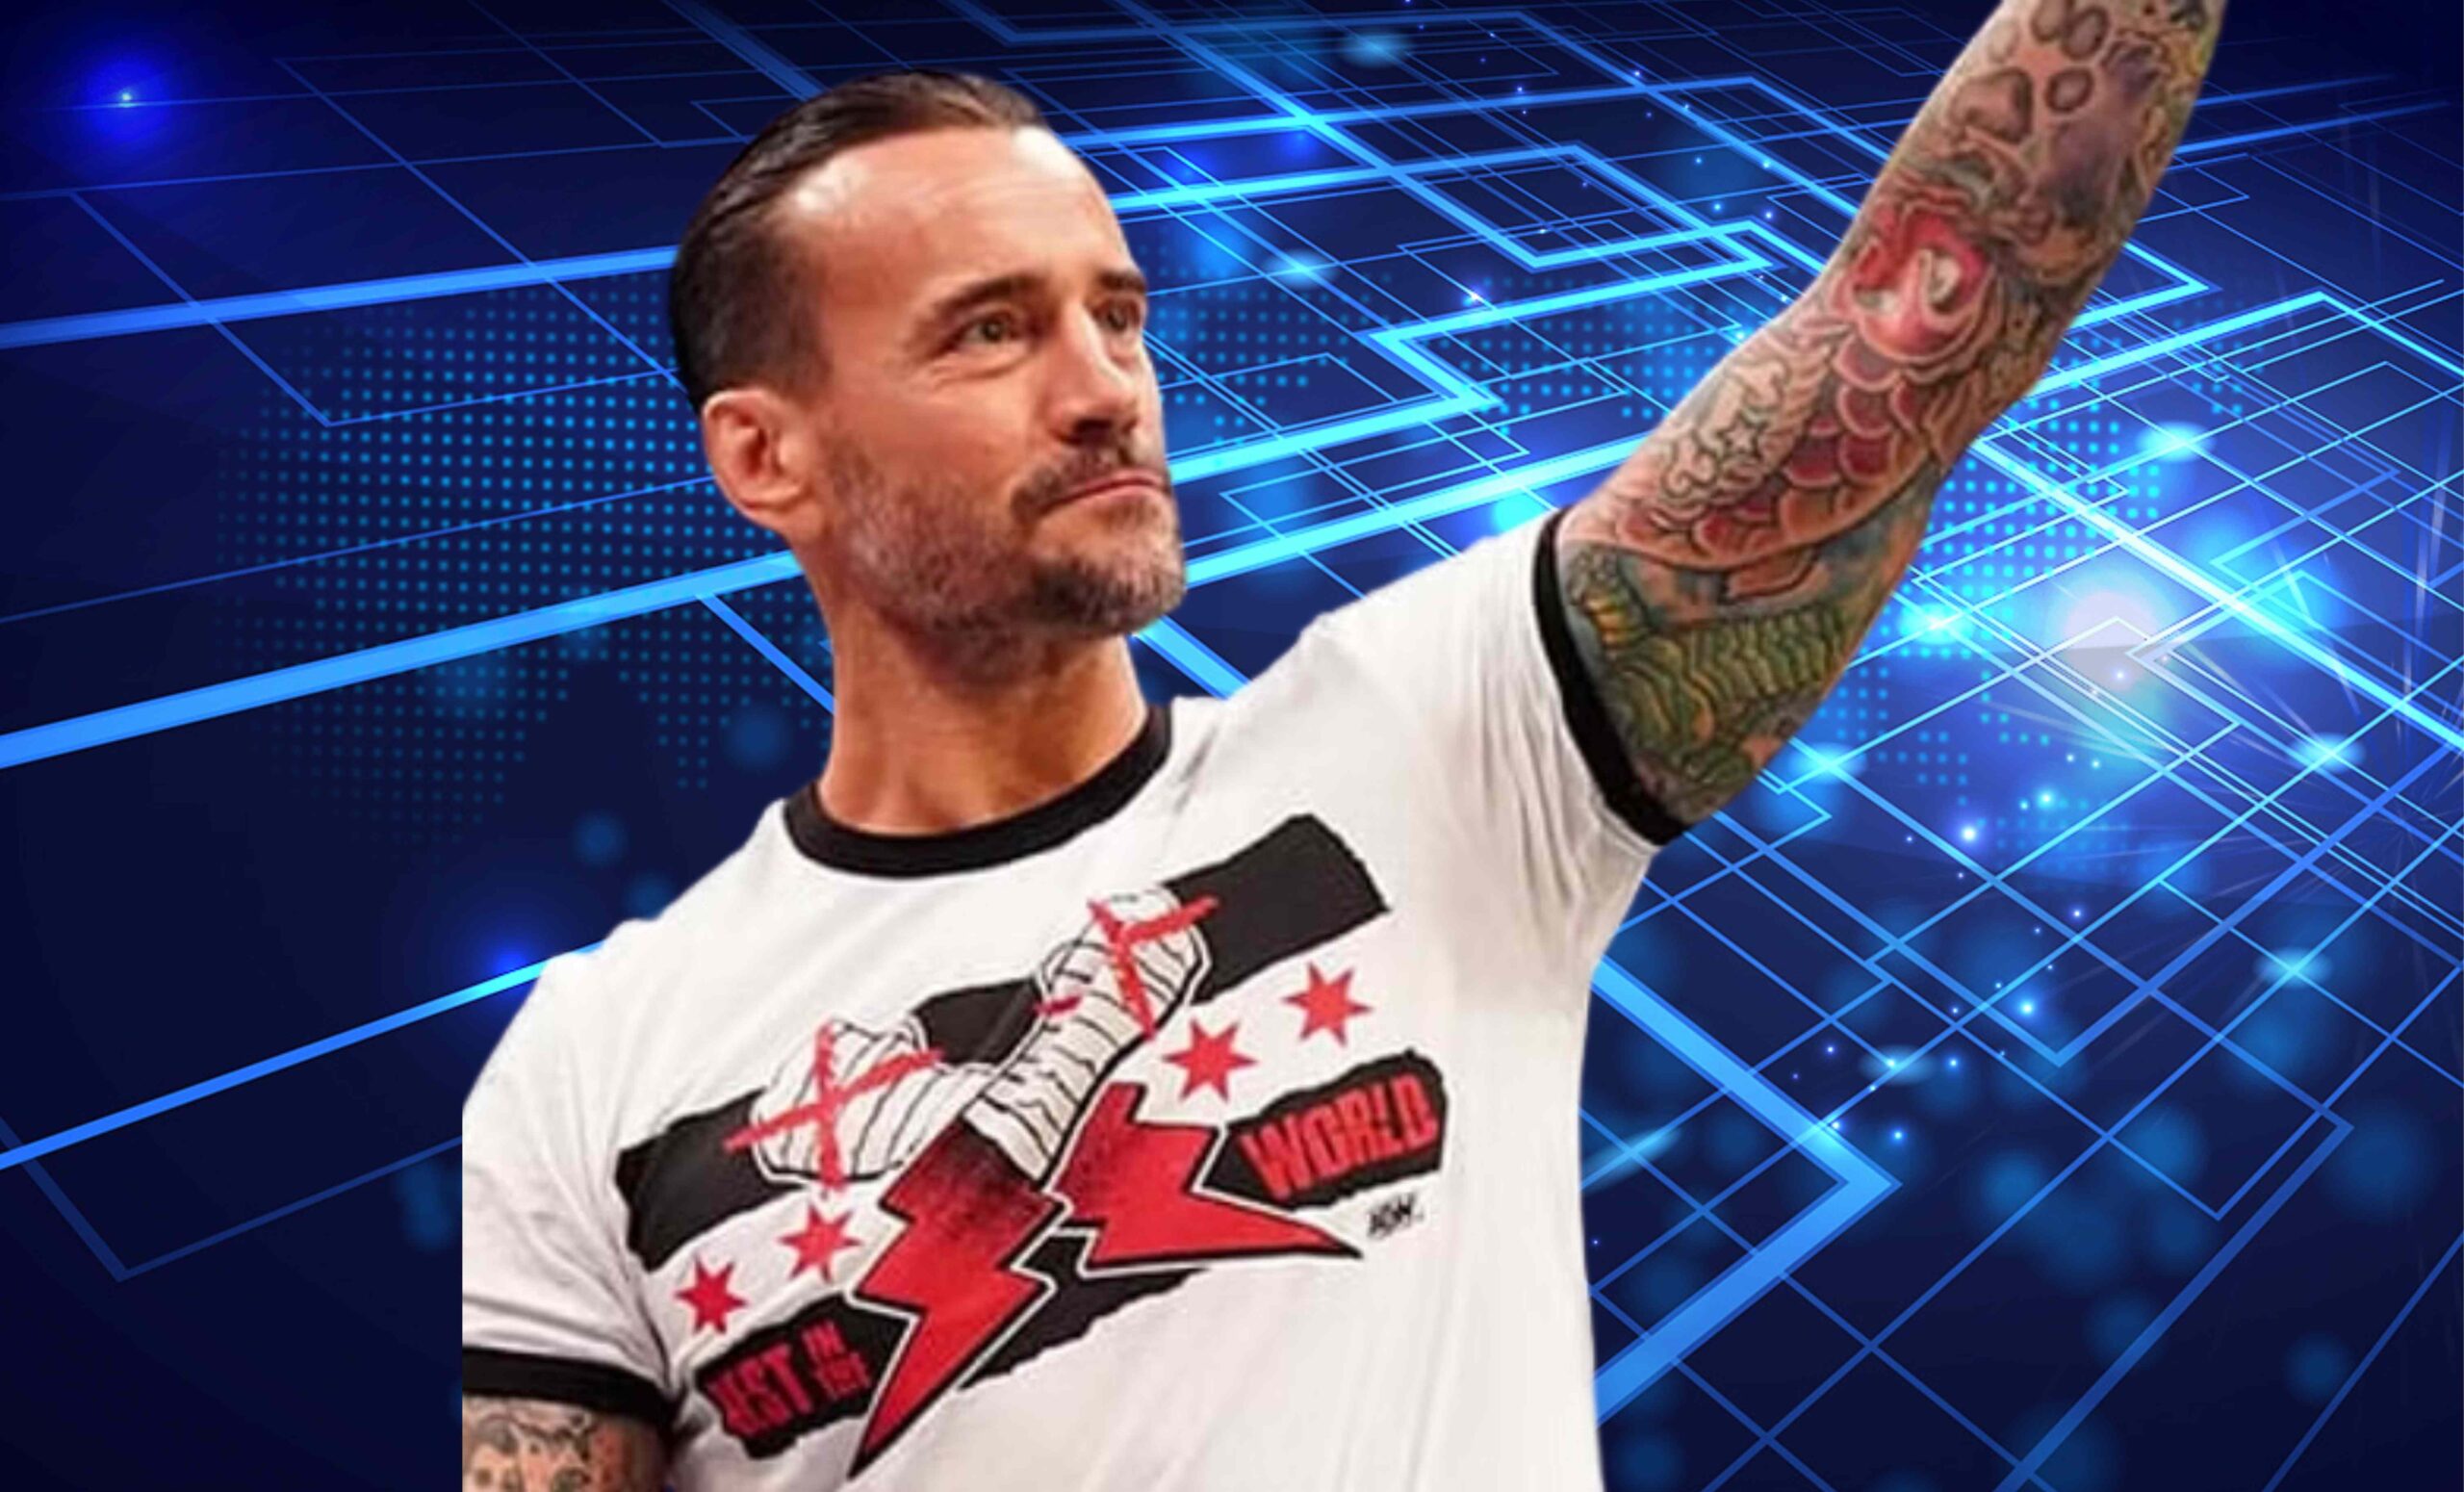 CM Punk's WWE Future in Limbo: Royal Rumble Injury Raises Concerns and Questions